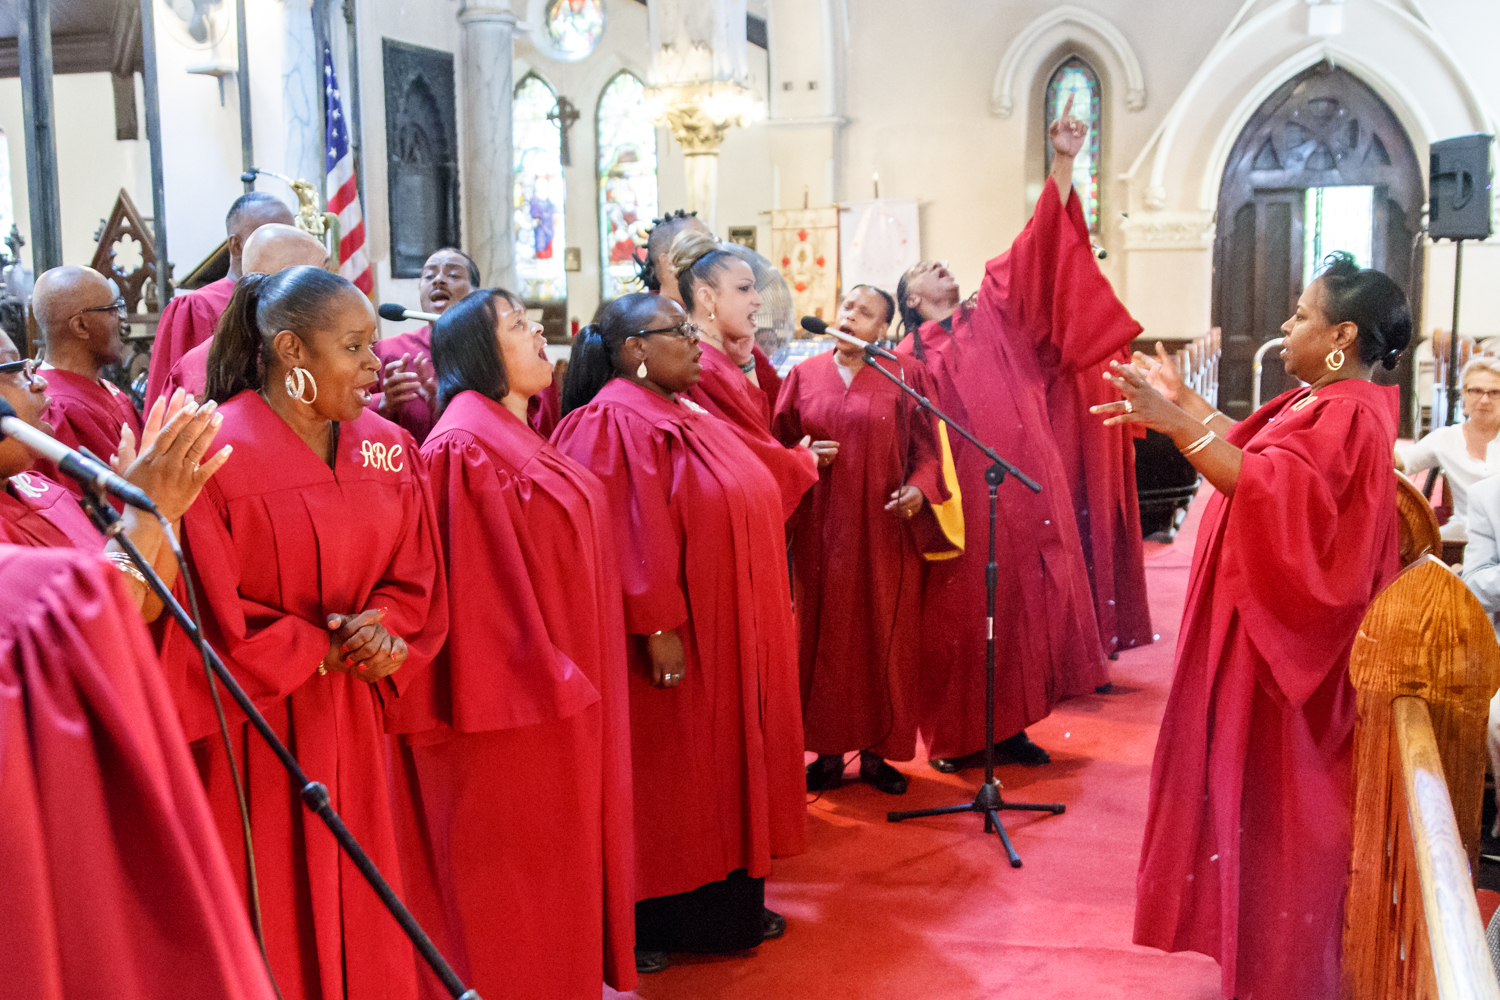 Guided Walking Tour of Harlem and Gospel Concert in a Church